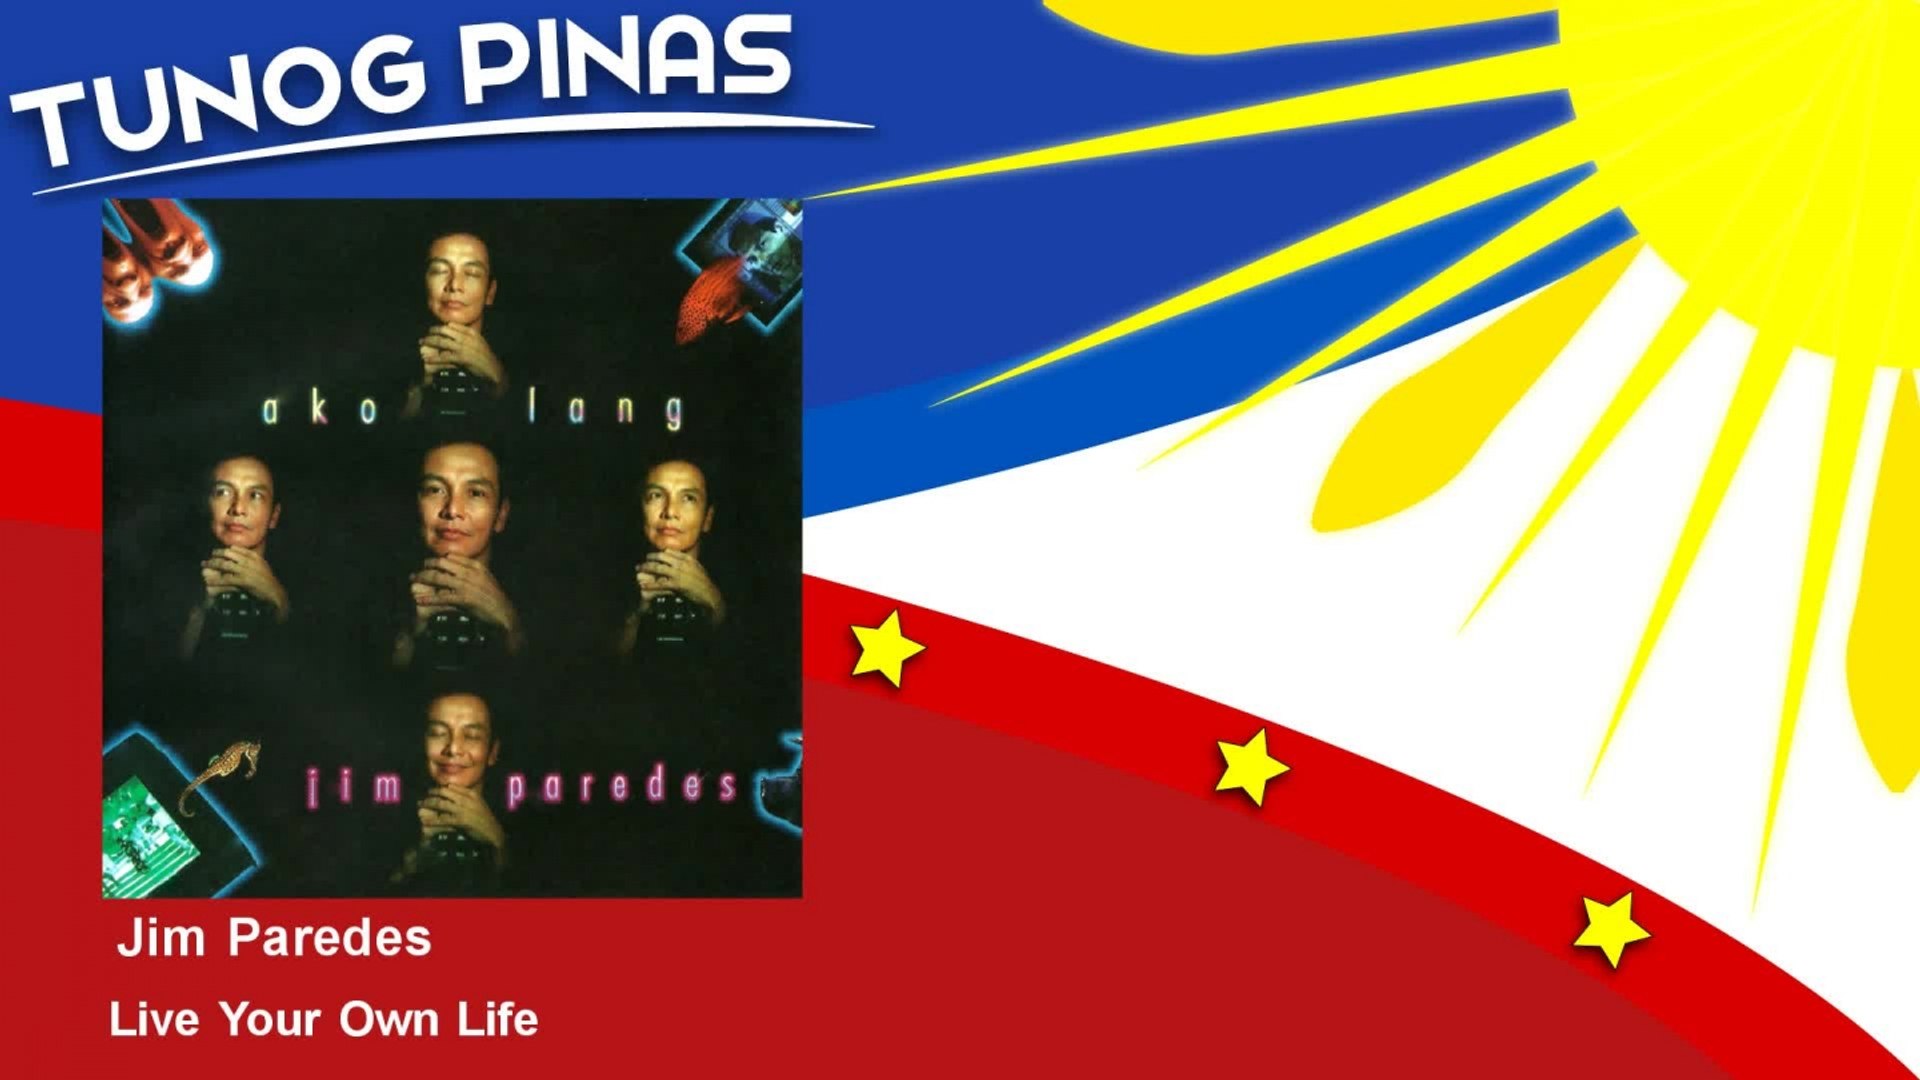 Jim Paredes - Live Your Own Life